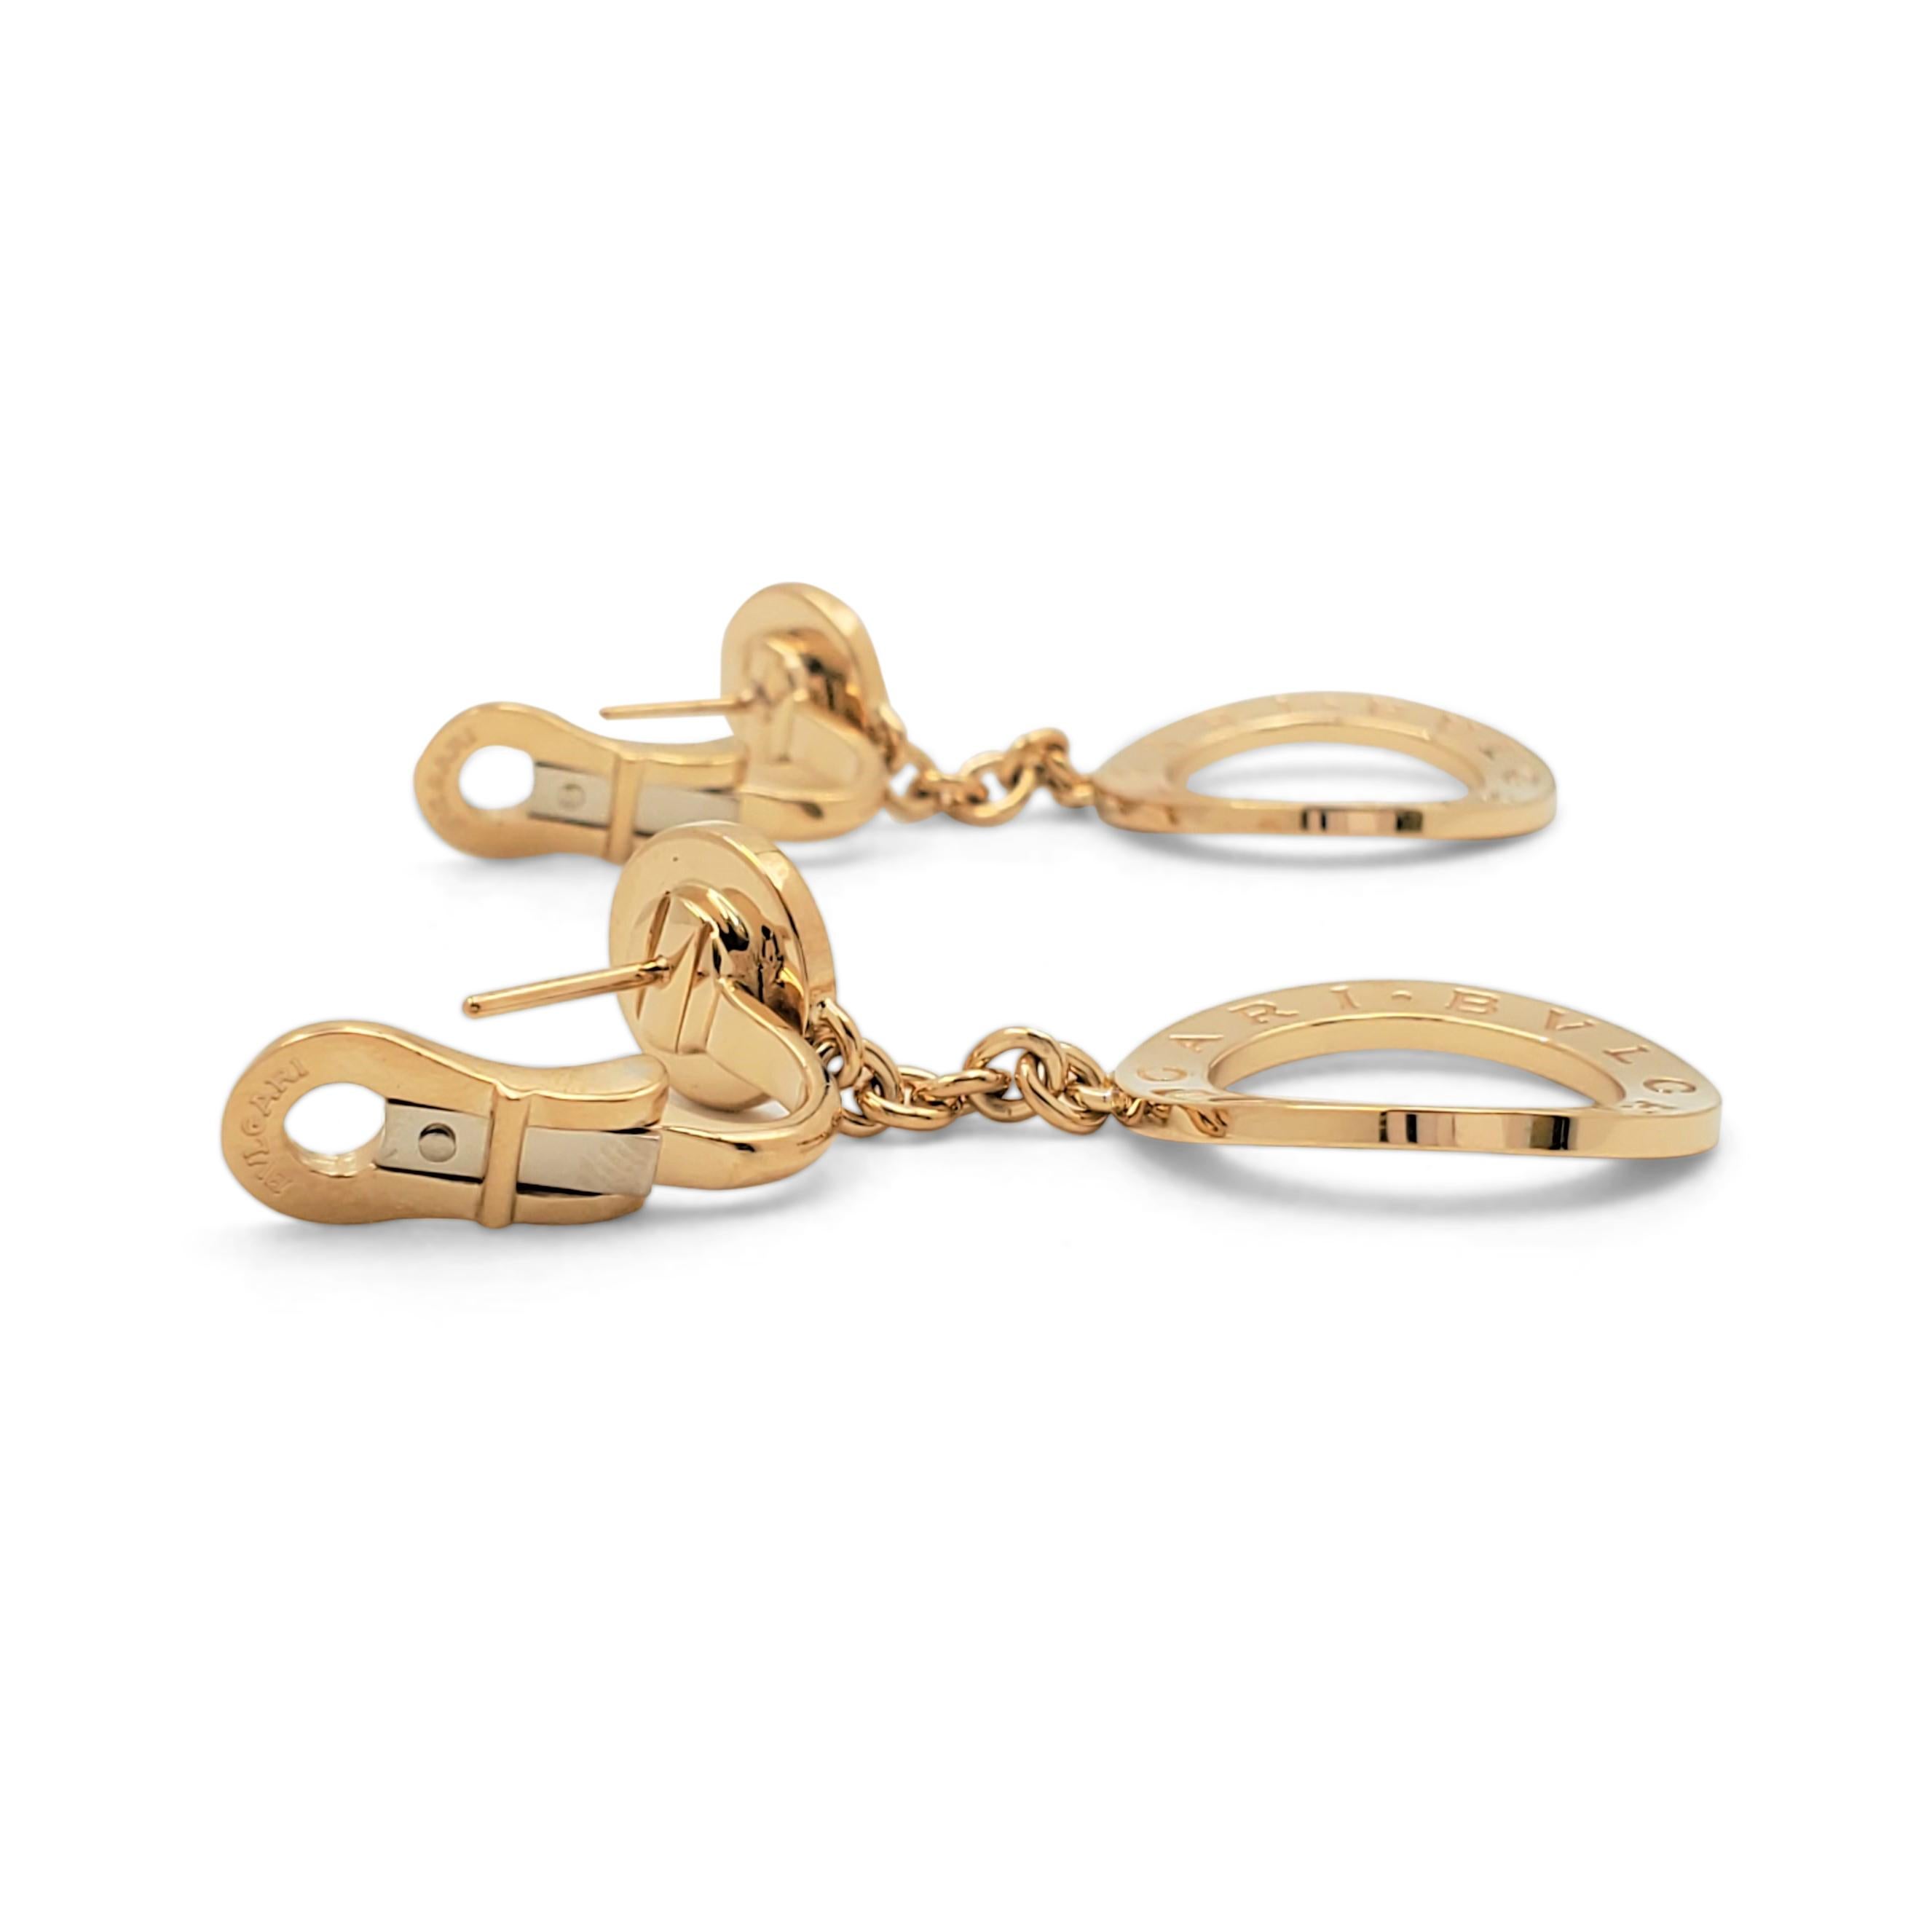 Authentic Bvlgari earrings from the 'Reva' collection. Crafted in 18 karat yellow gold, the earrings are comprised of an open disc engraved BVLGARI-BVLGARI on both sides and one smaller disc set with a shimmering round mother-of-pearl accent. Signed